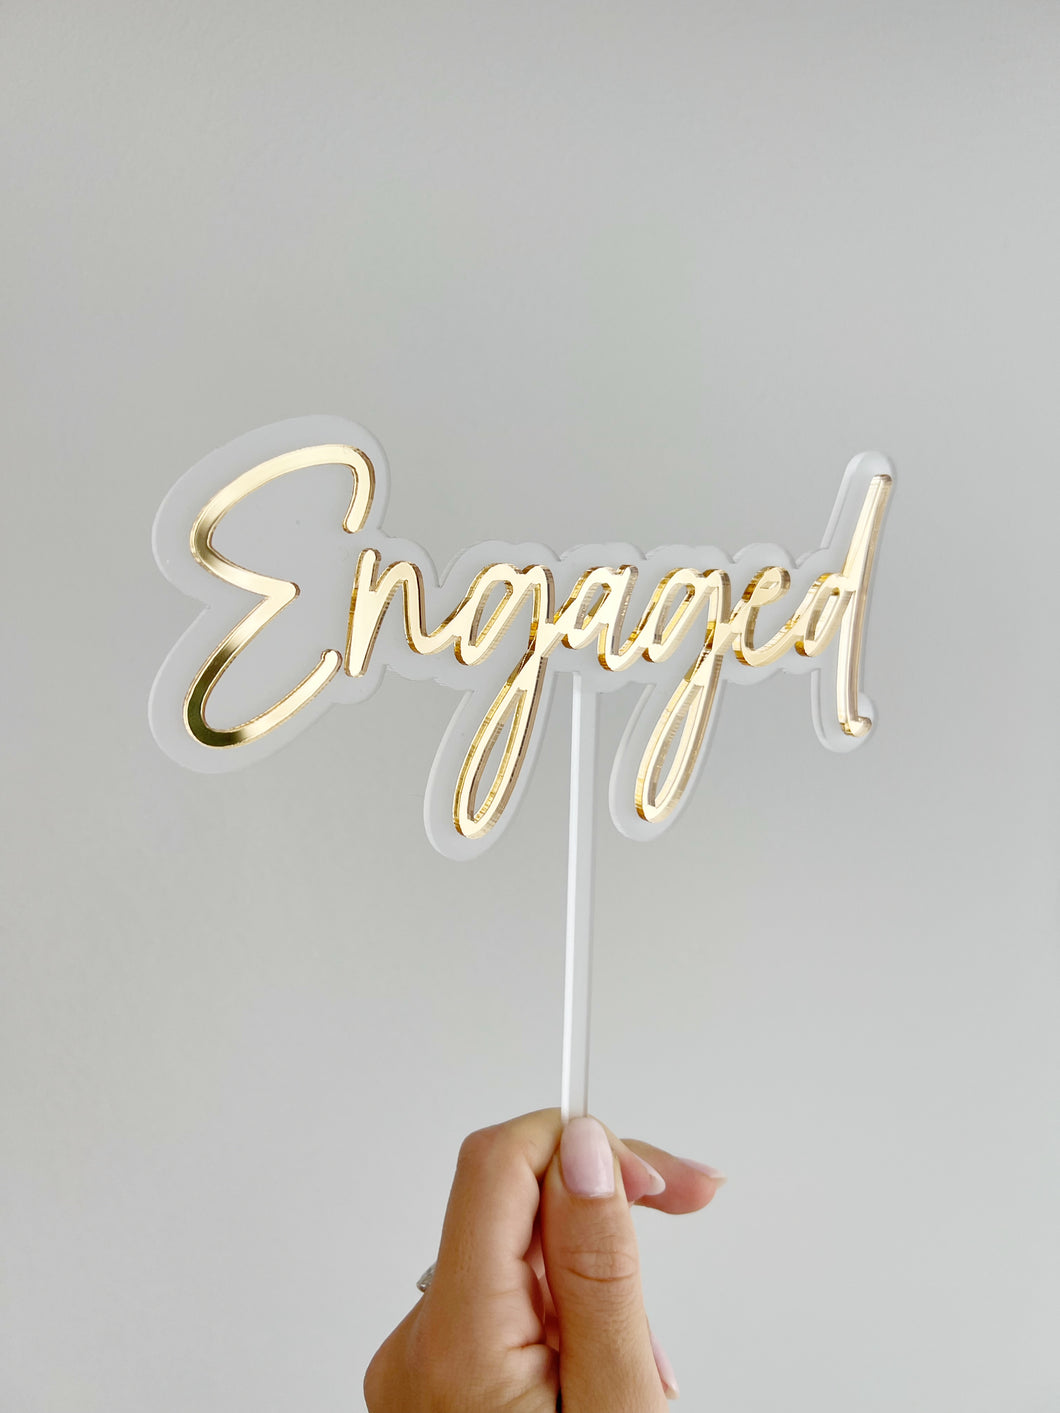 Layered engaged cake topper